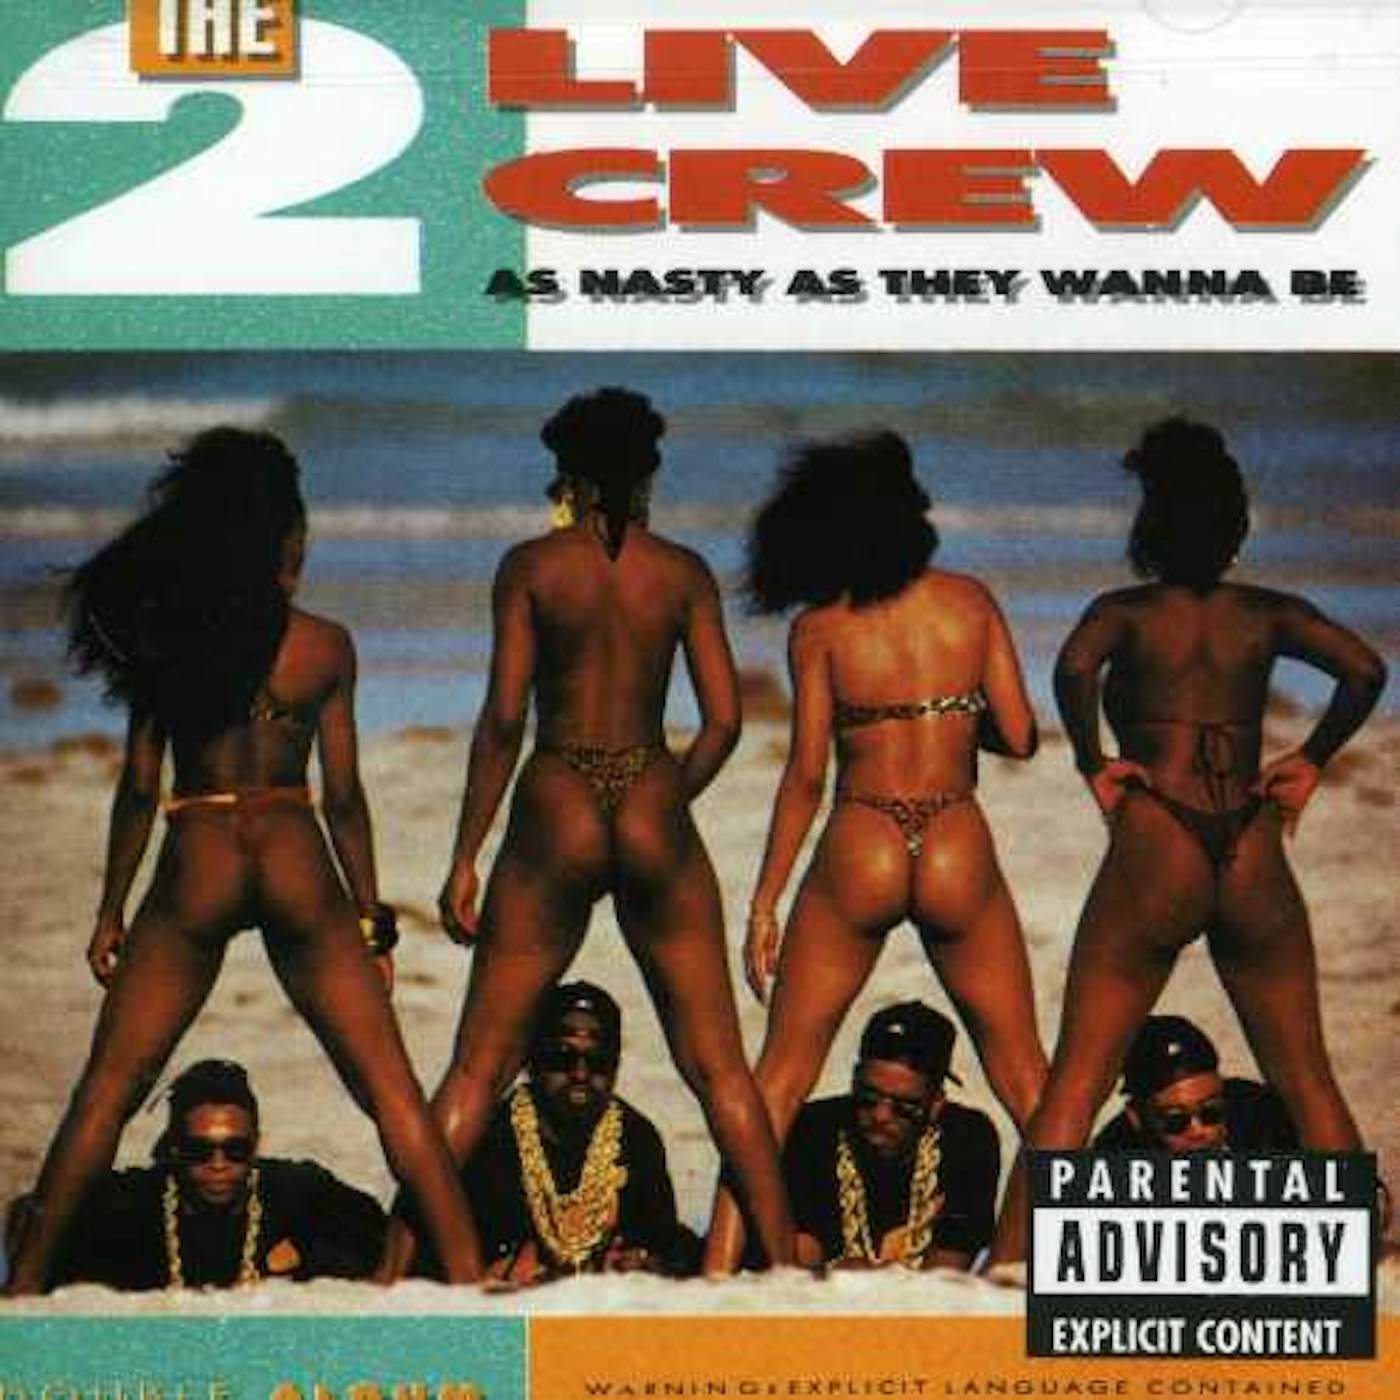 2 LIVE CREW AS NASTY AS THEY WANNA BE CD